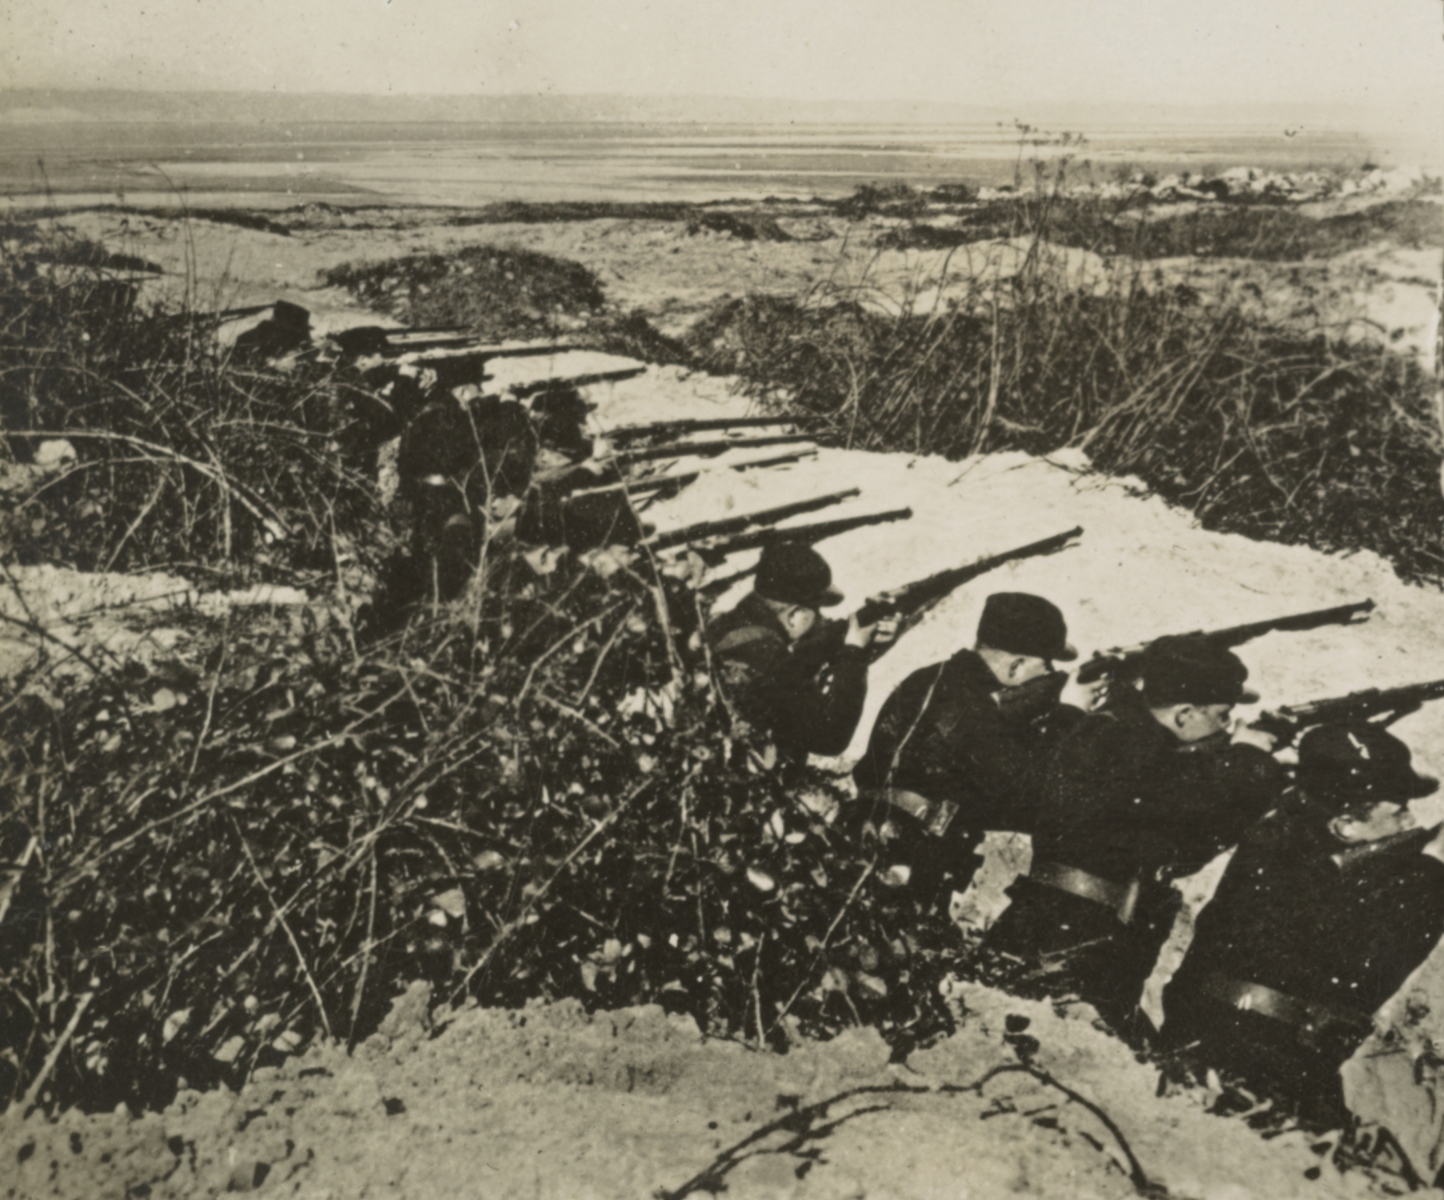 Trenches of the Allies among the dunes and brambles on the coast of Flanders, ca.1914-1918